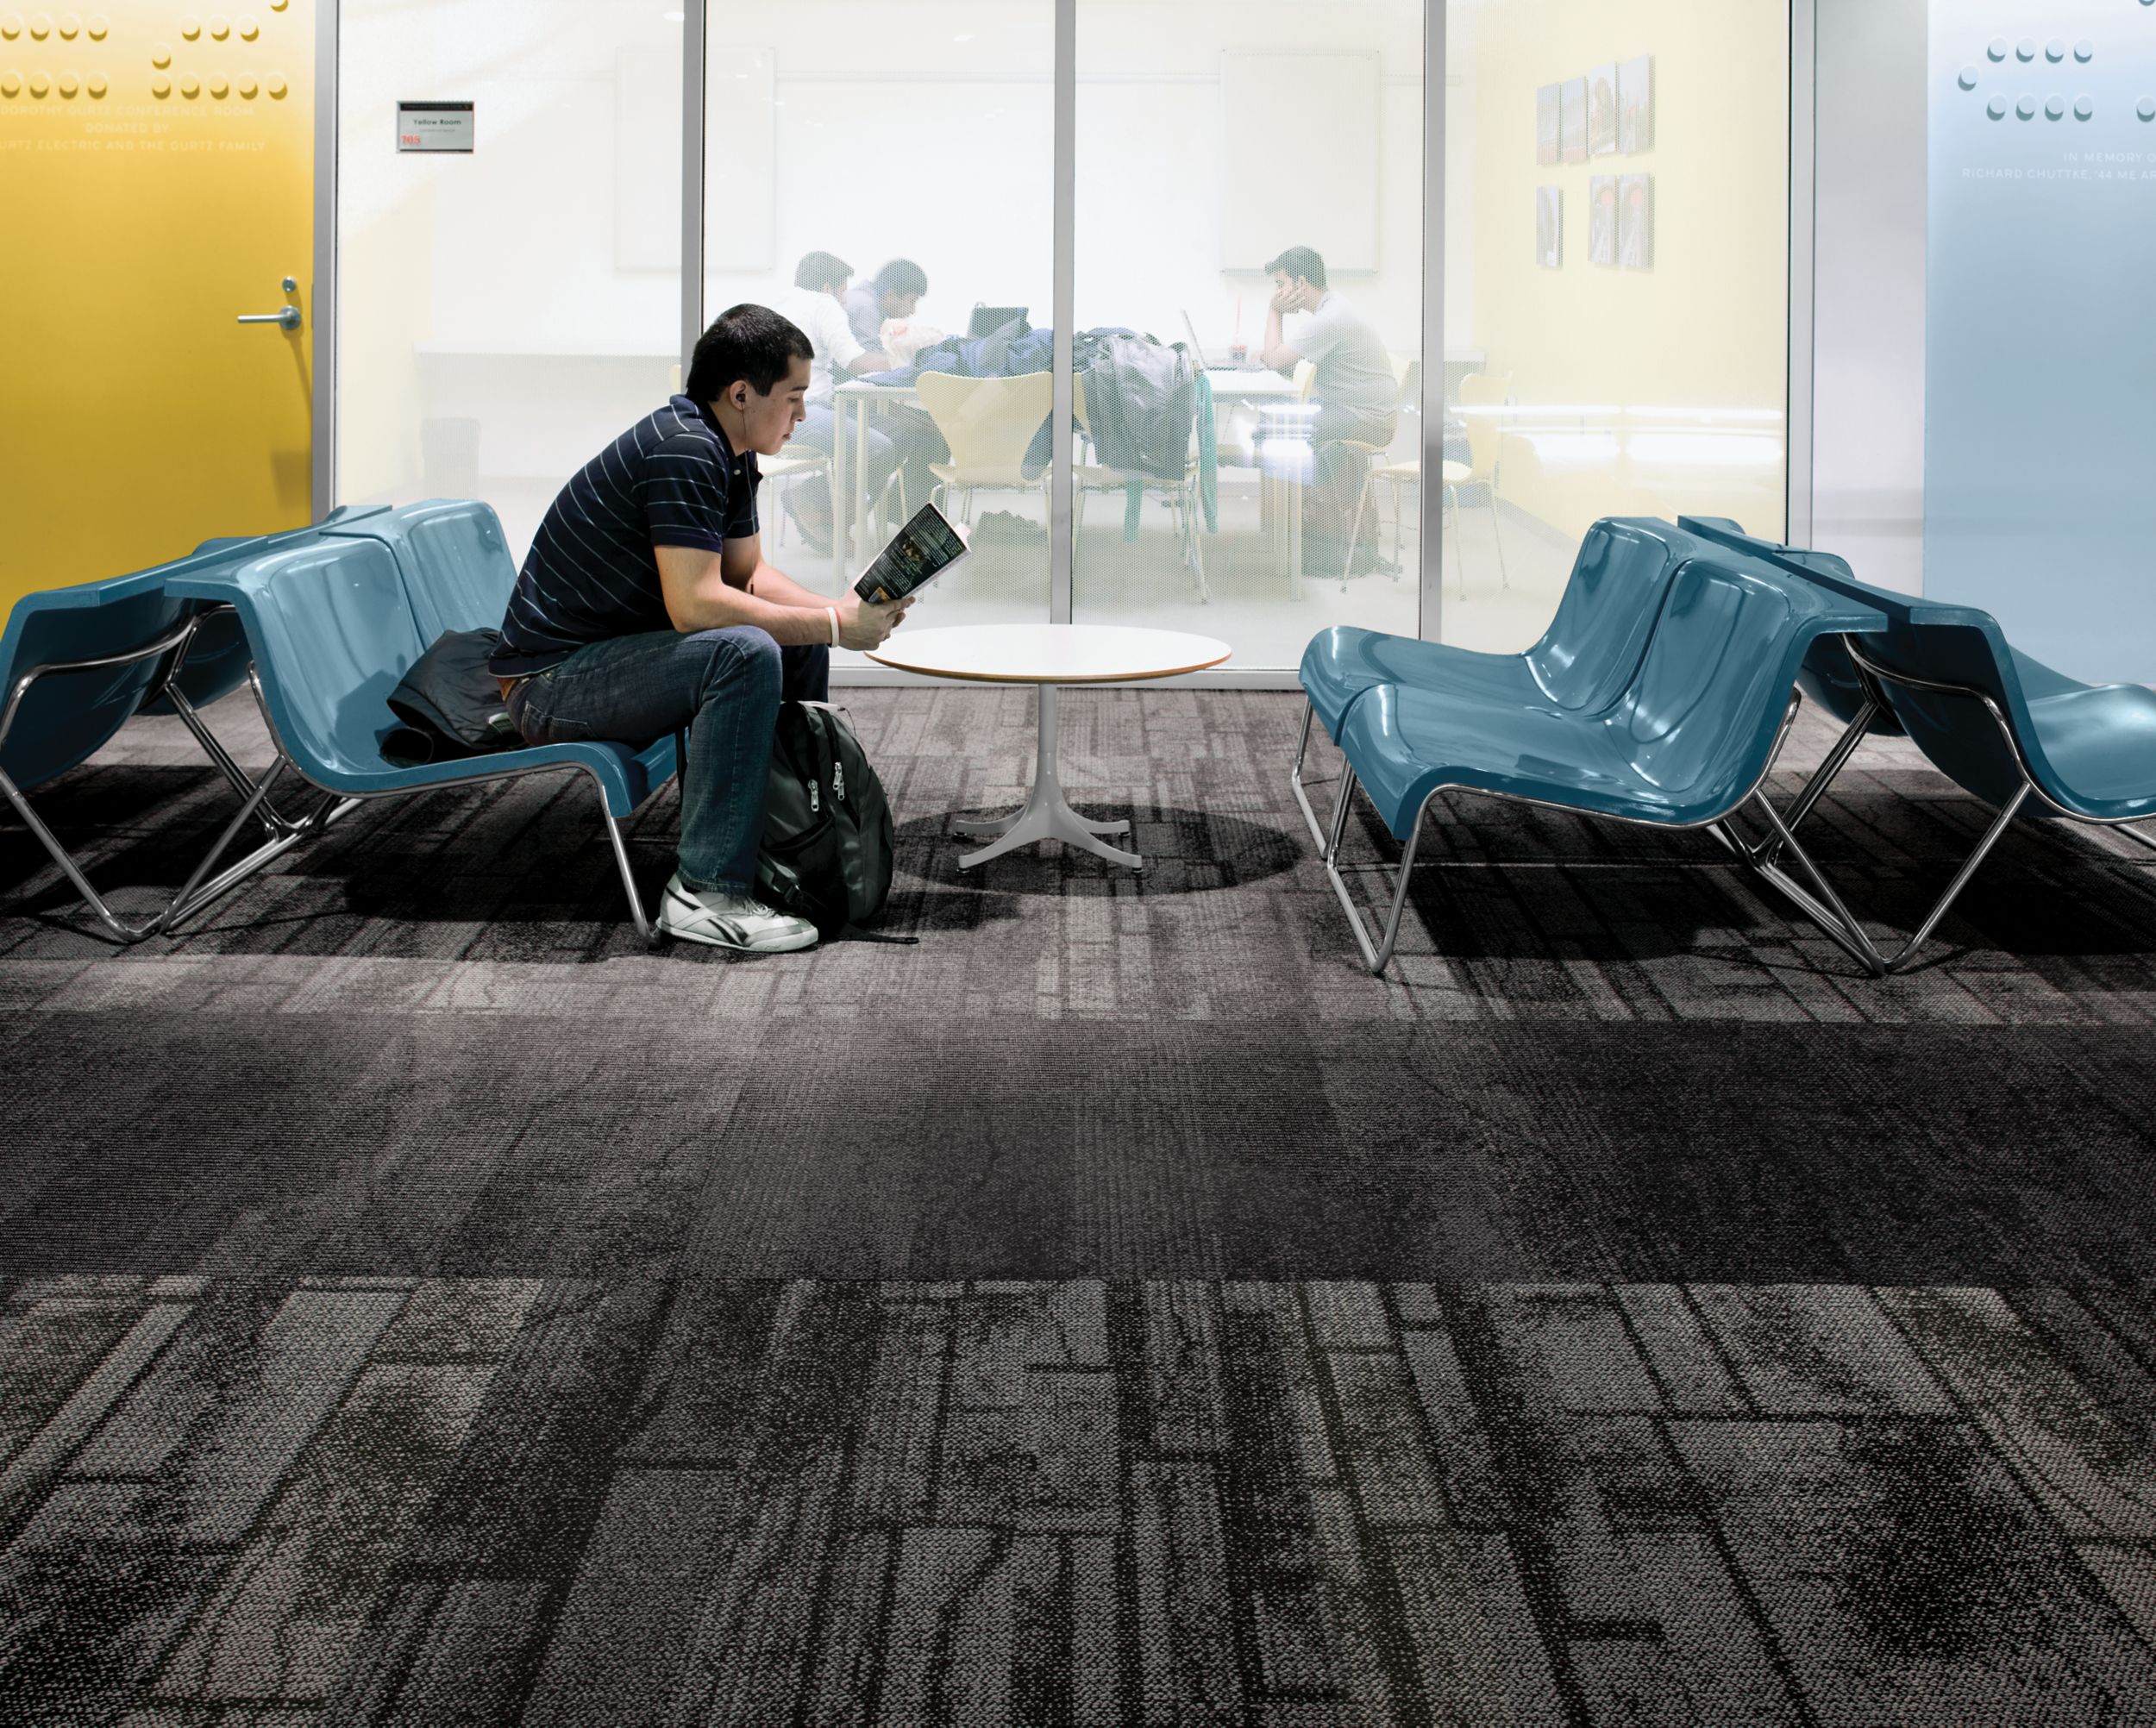 Interface Neighborhood Blocks and Neighborhood Smooth plank carpet tile in public education space with man reading a book on blue chair image number 6